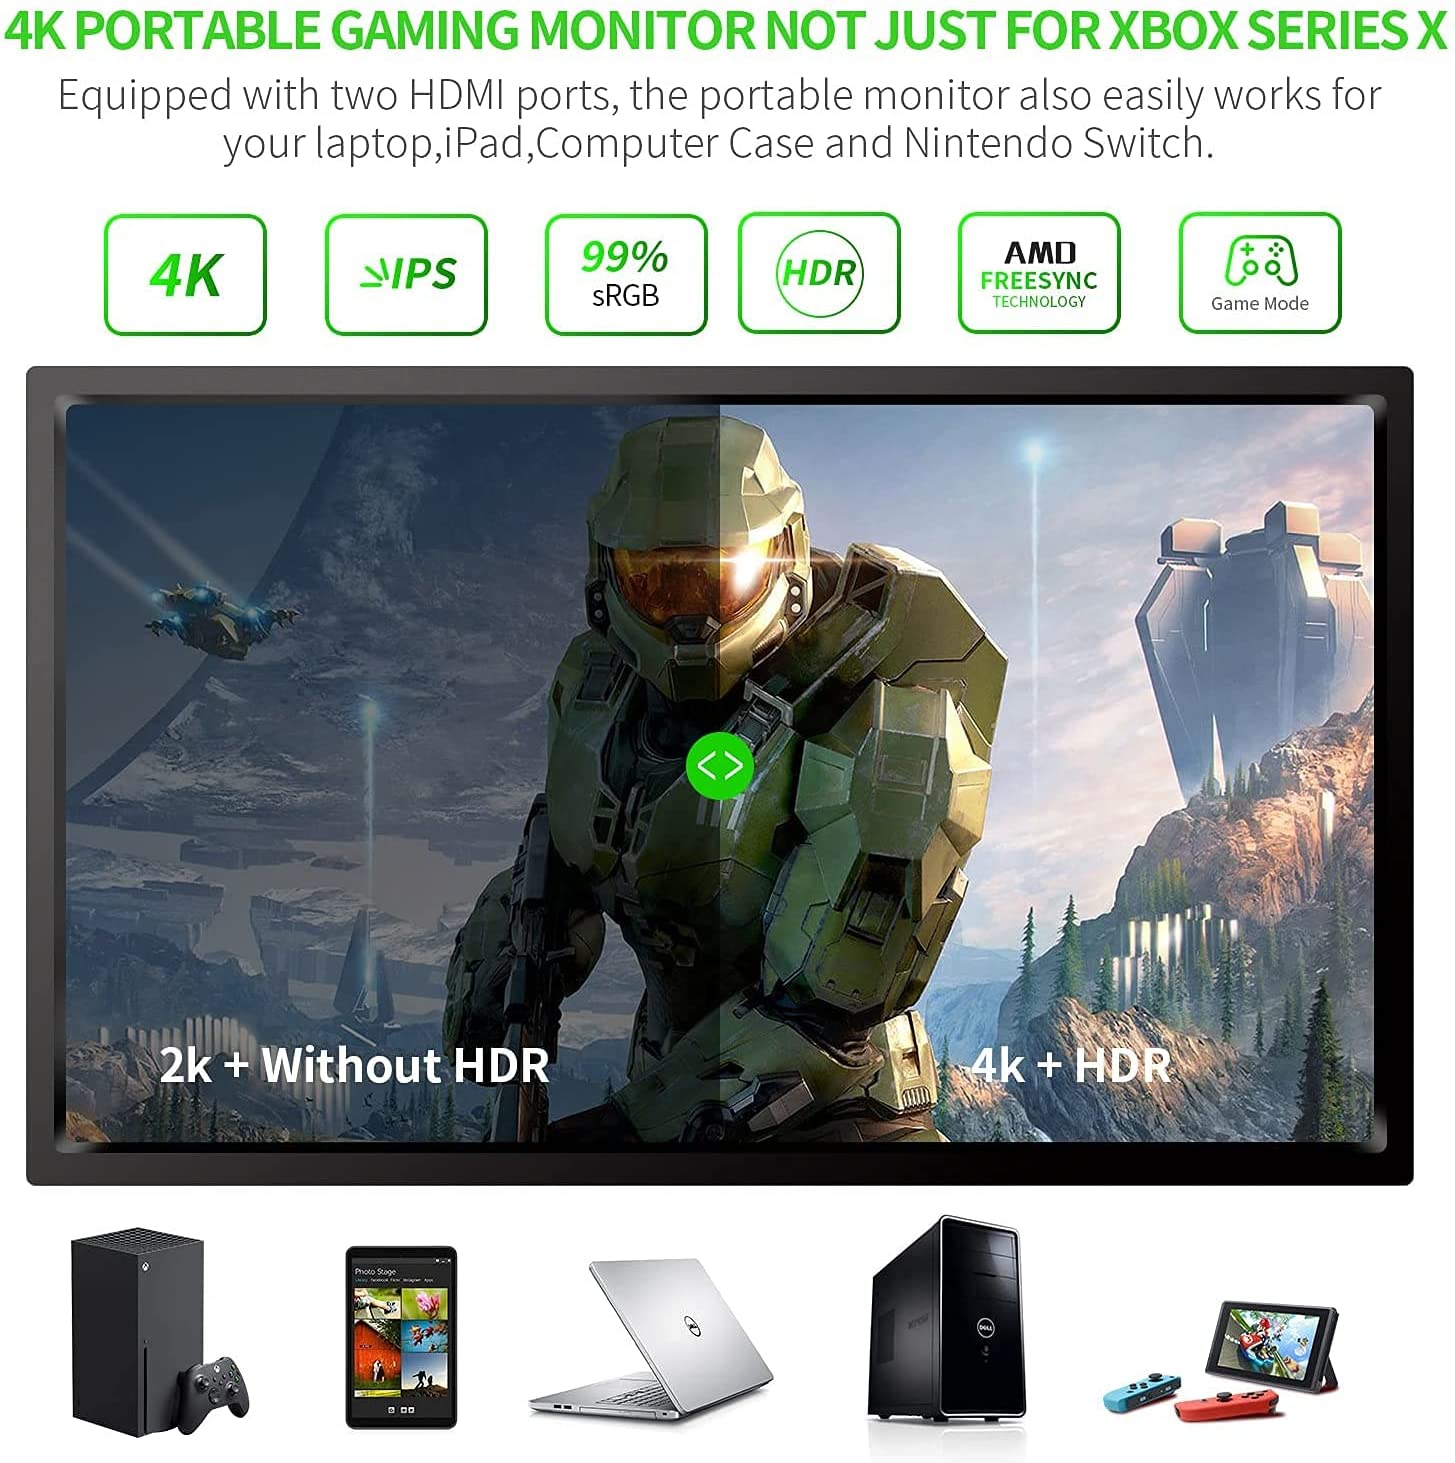 G-STORY 14'' Portable Monitor for Xbox Series X 4K Portable Gaming Monitor  IPS Screen for Xbox Series S（not Included） with Two HDMI, HDR, Freesync